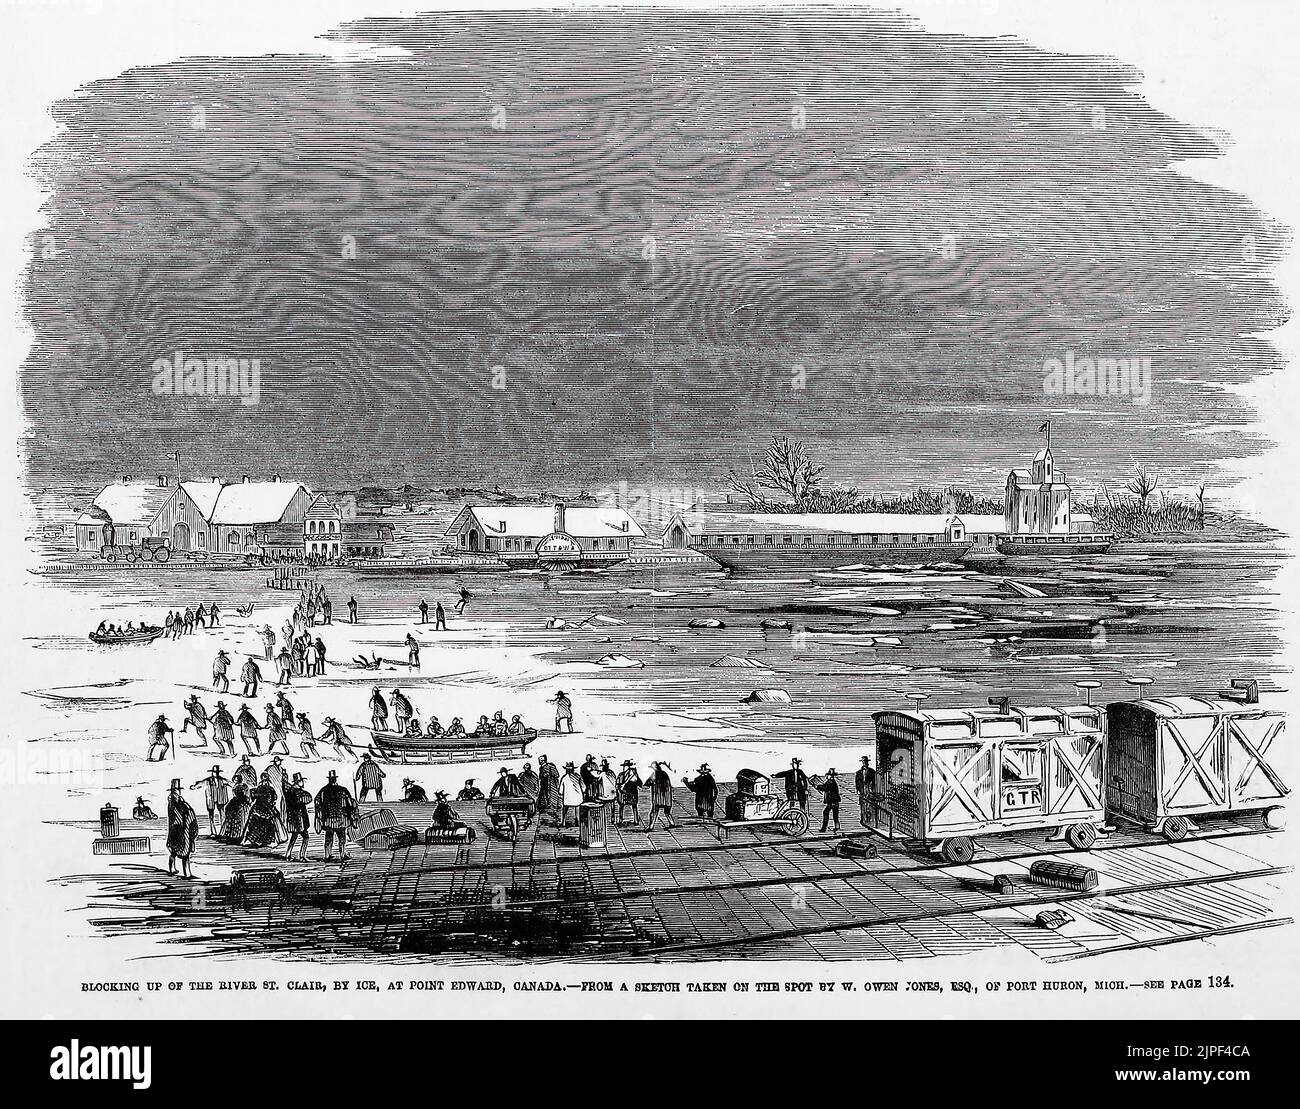 Blocking up of the river St. Clair, by ice, at Point Edward, Canada (1860). 19th century illustration from Frank Leslie's Illustrated Newspaper Stock Photo